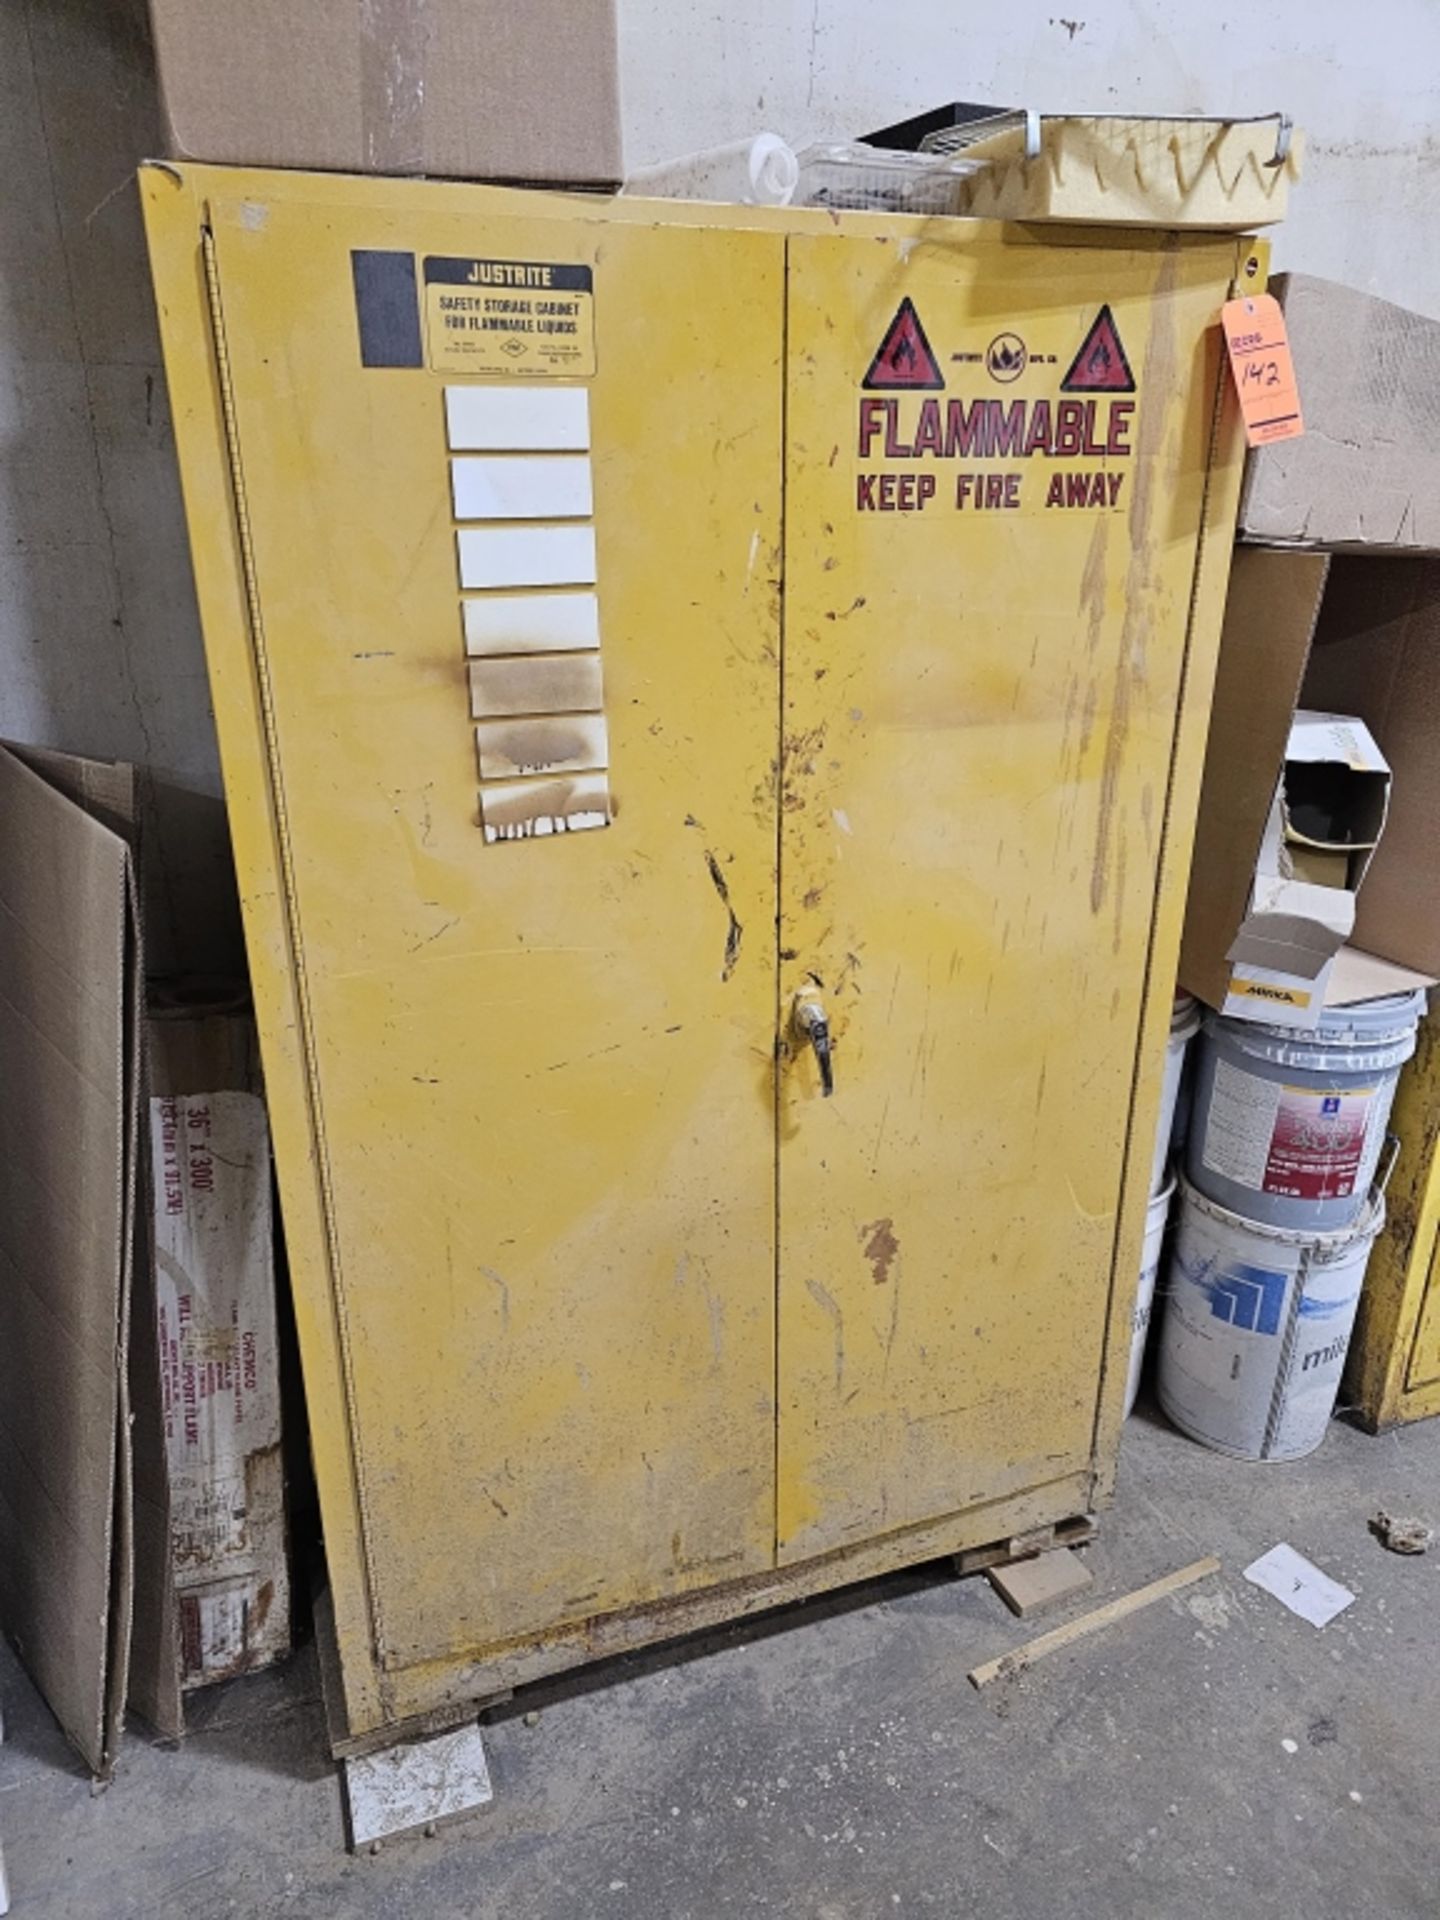 JustRite Flammable Storage Cabinet - Image 3 of 4